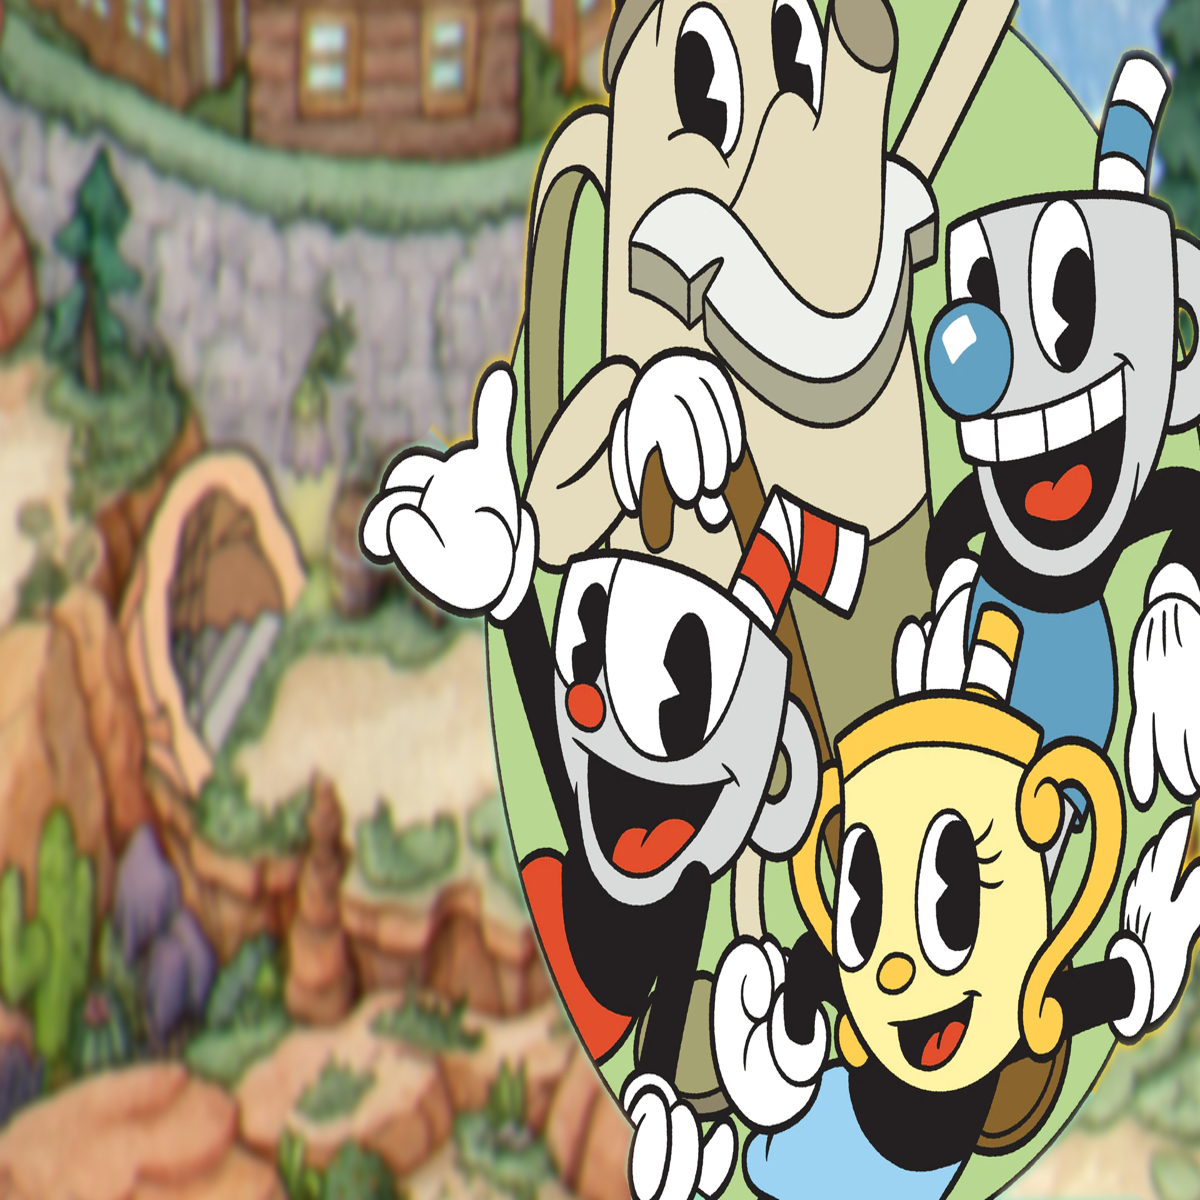 The Cuphead Show but only Ms Chalice: Part III 